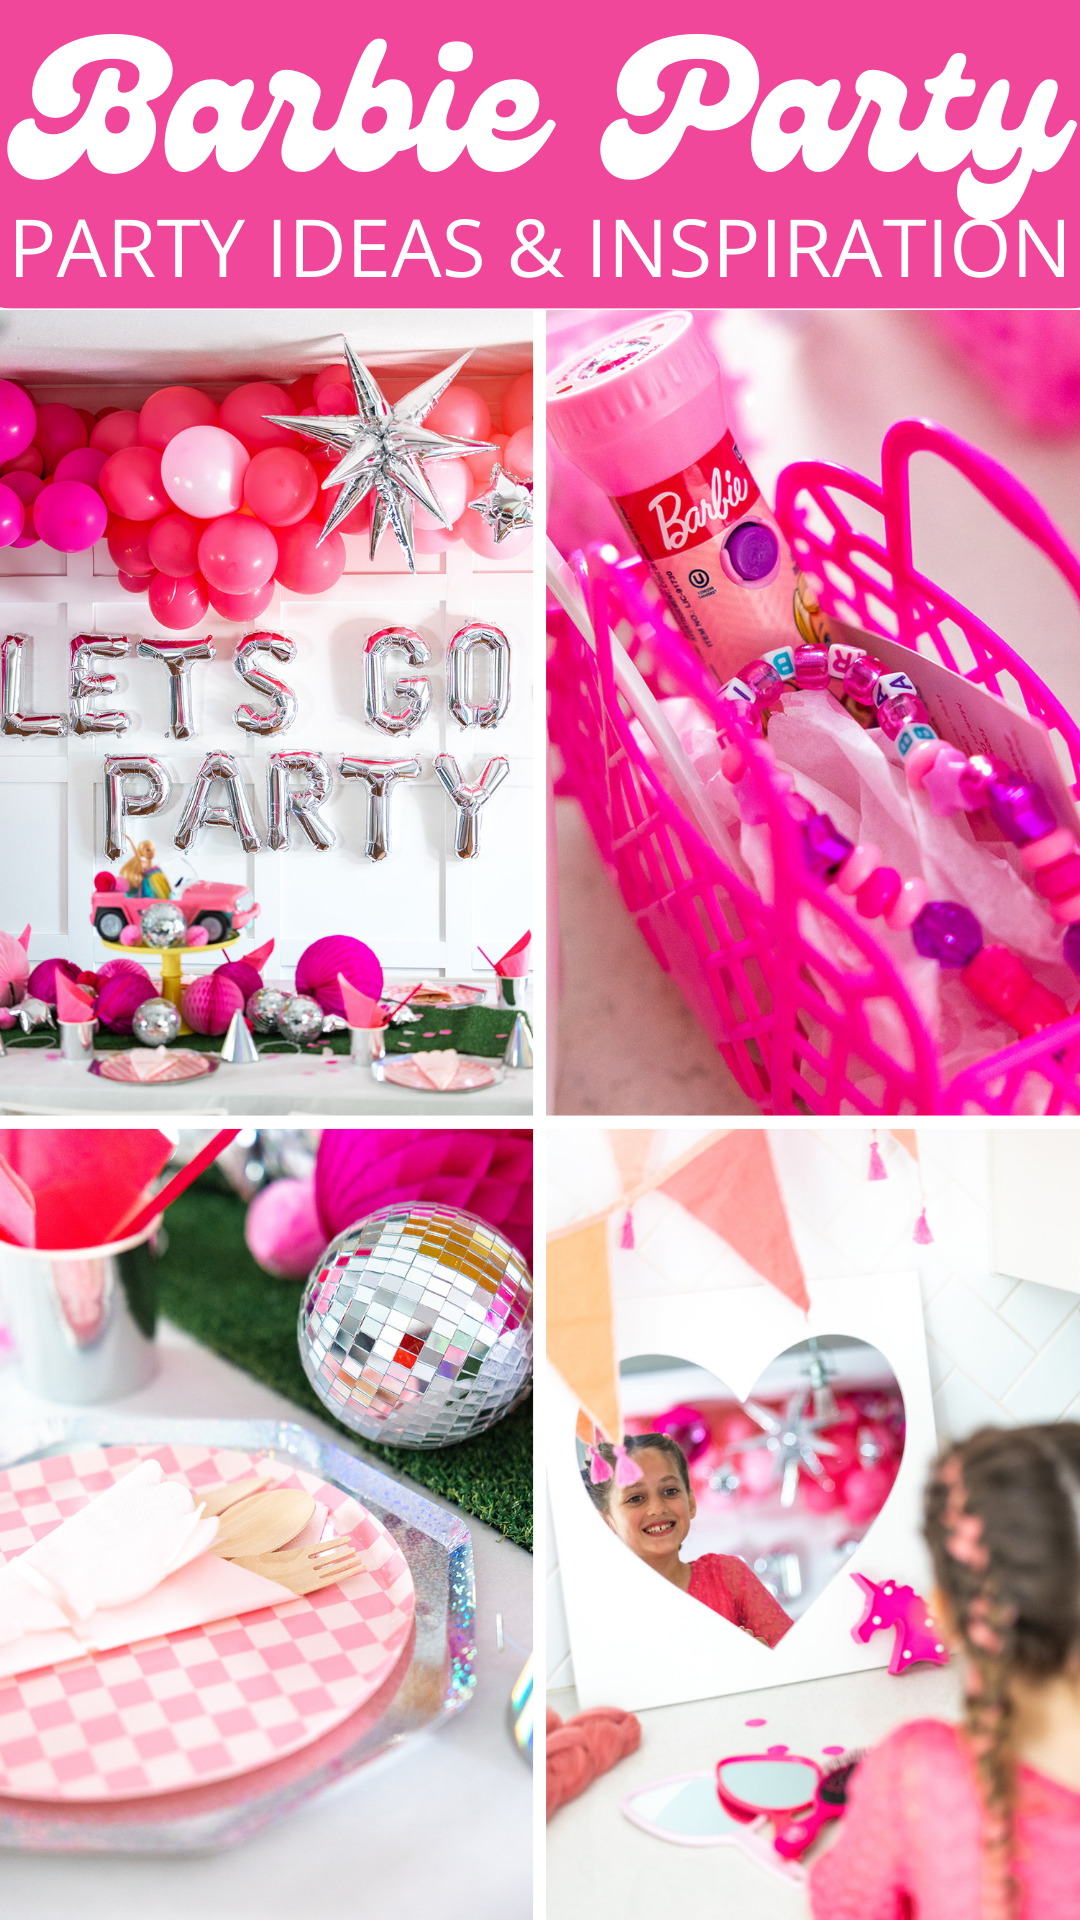 Barbie Party Decorations and DIY's!